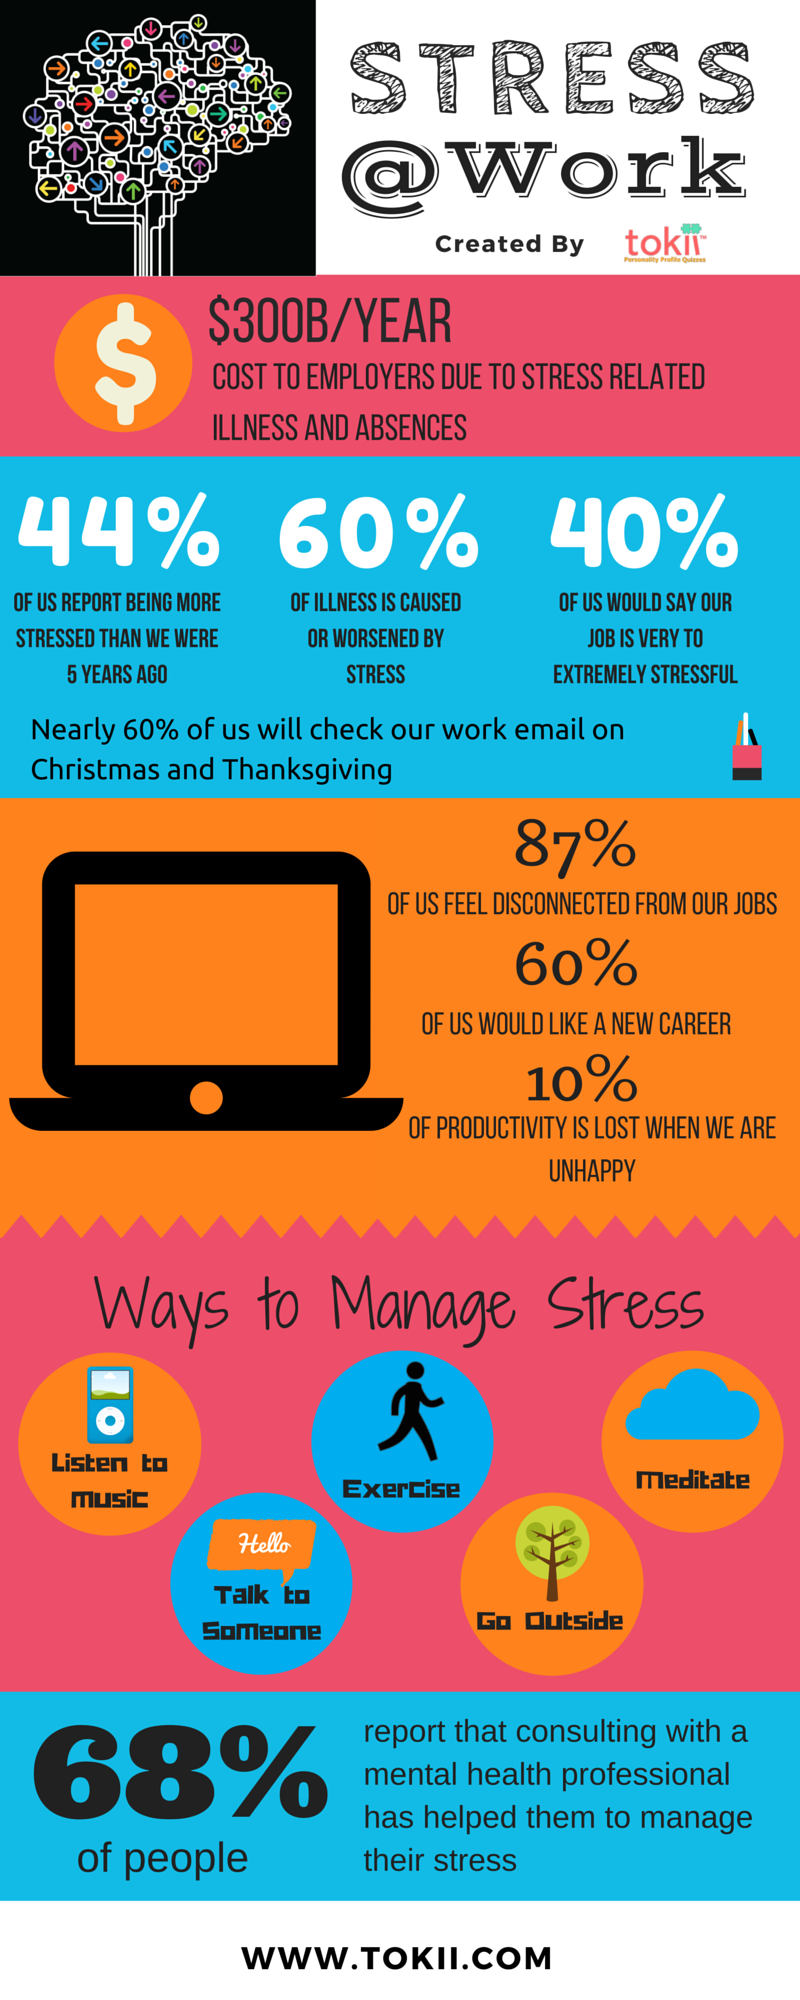 Stress at work (infographic)